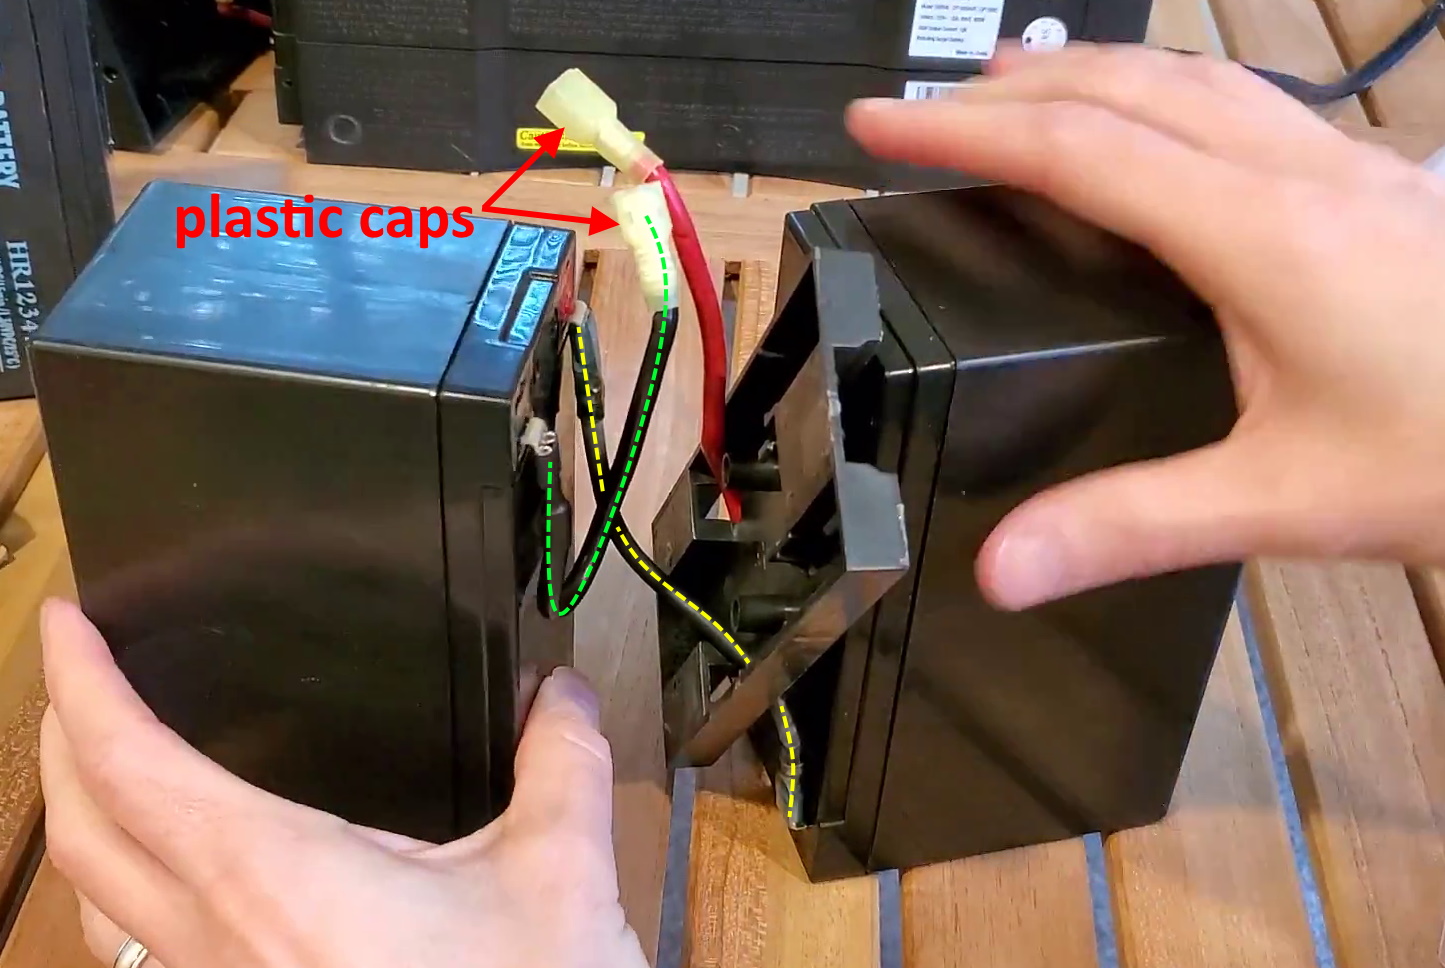 diagram showing how the internal wires need to be wired to the batteries, part of the How to Replace a CyberPower 1500AV UPS Battery article